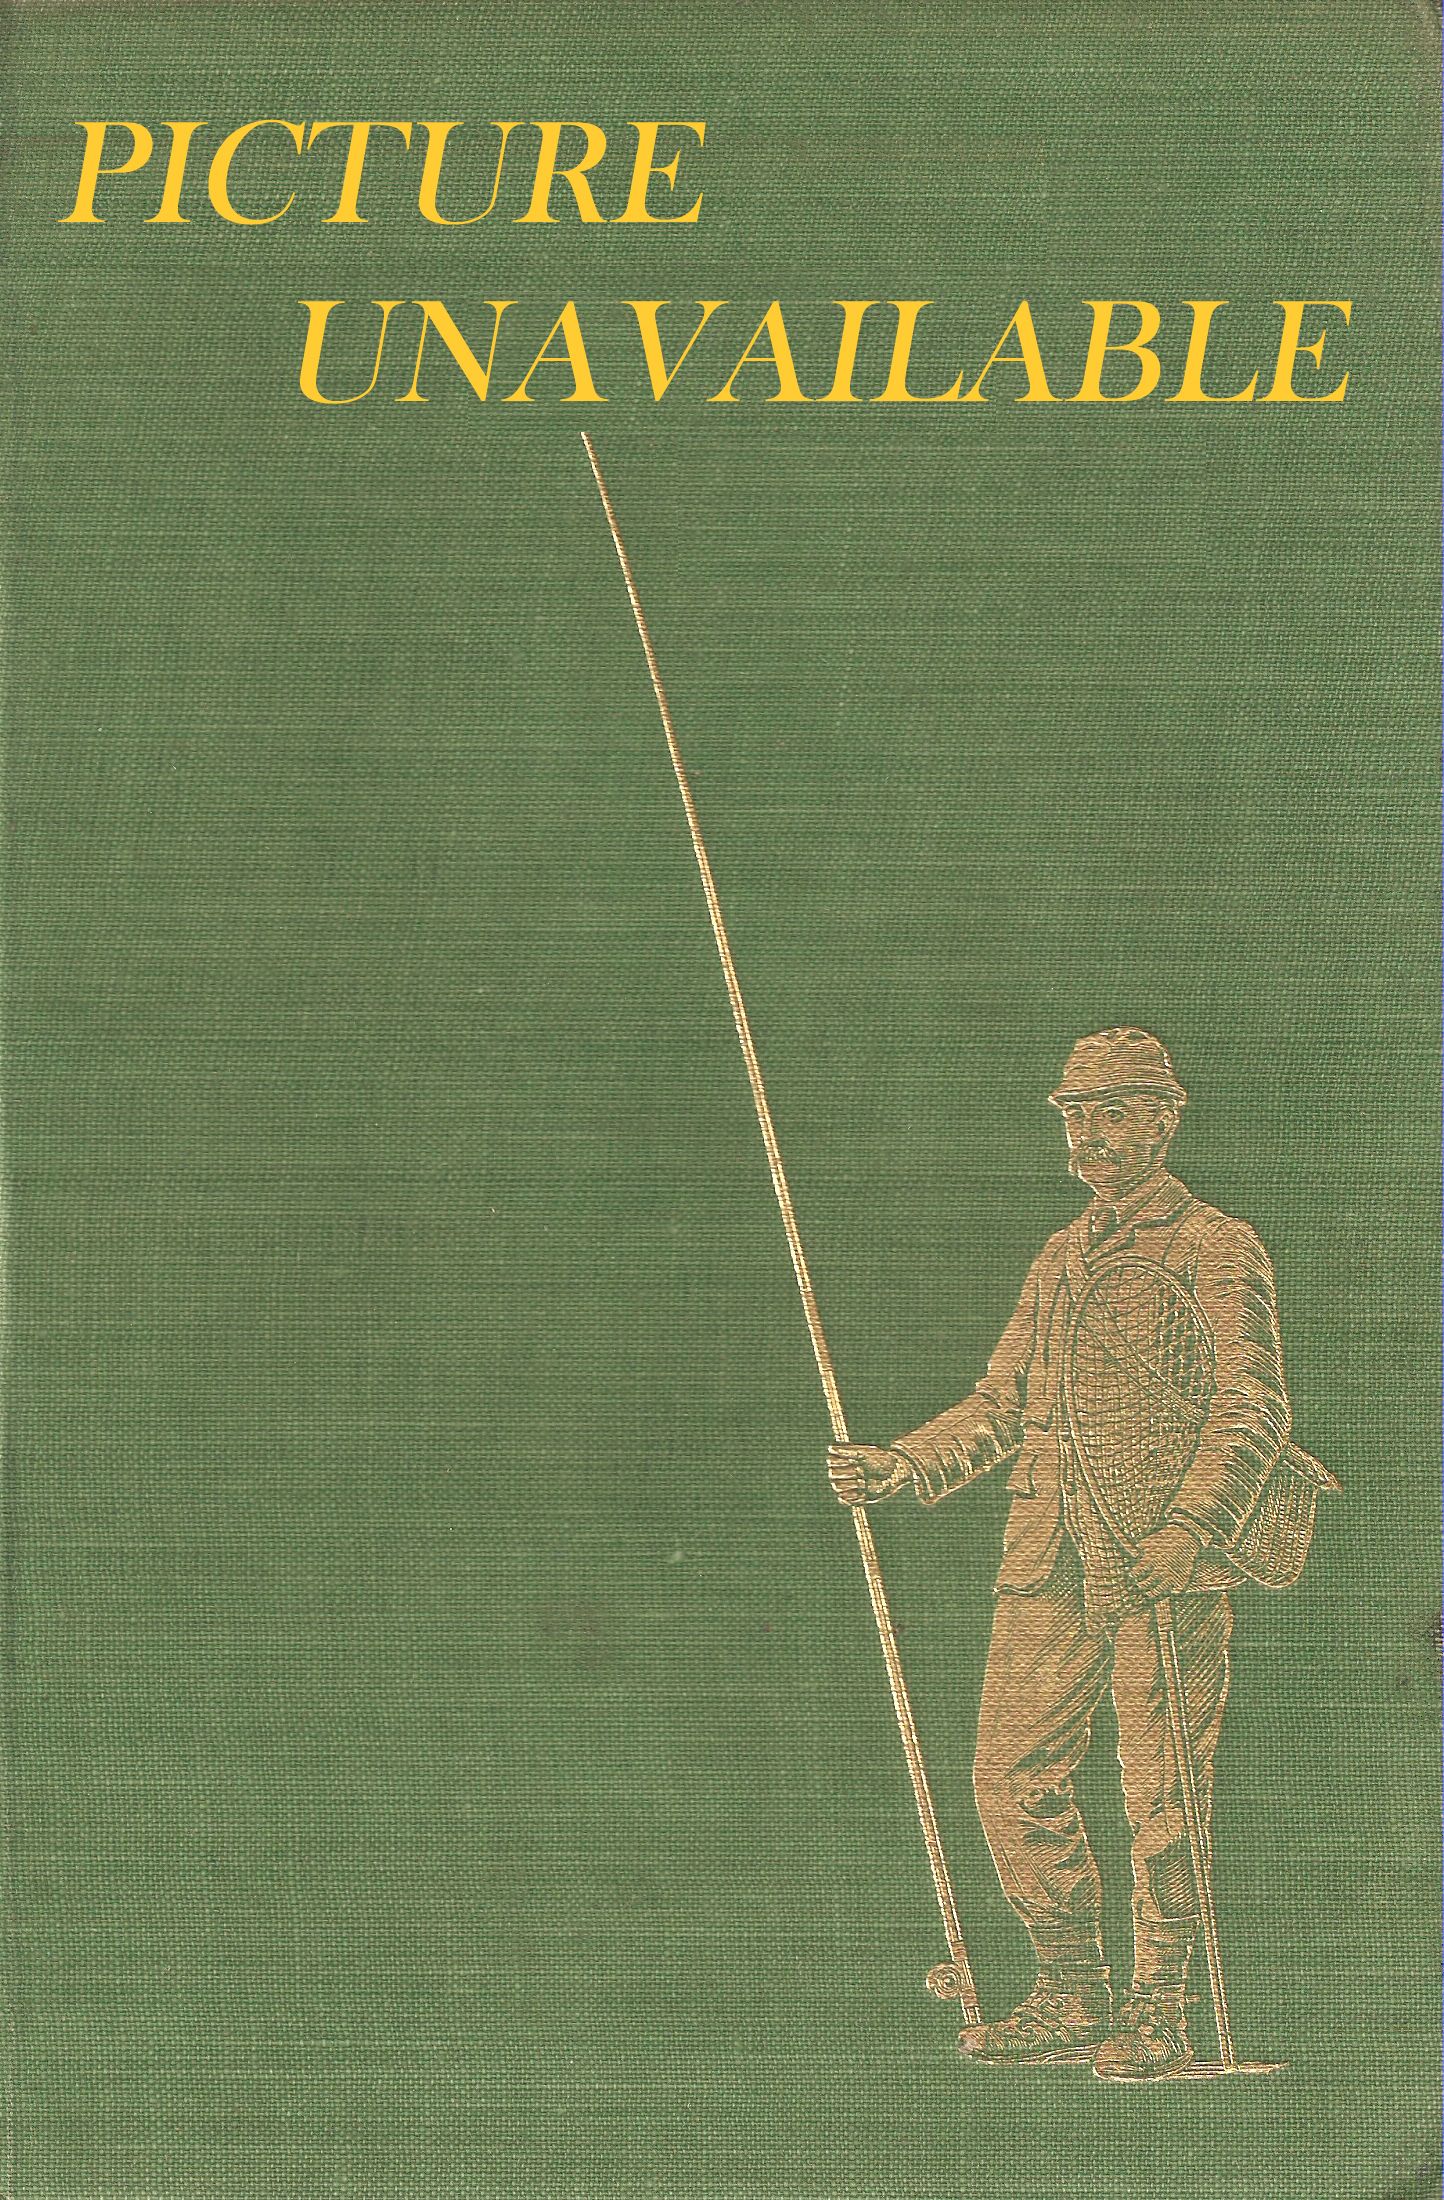 TIE A FLY, CATCH A TROUT. By S.R. Slaymaker II. With fly-tying  instructions and drawings by George Harvey.